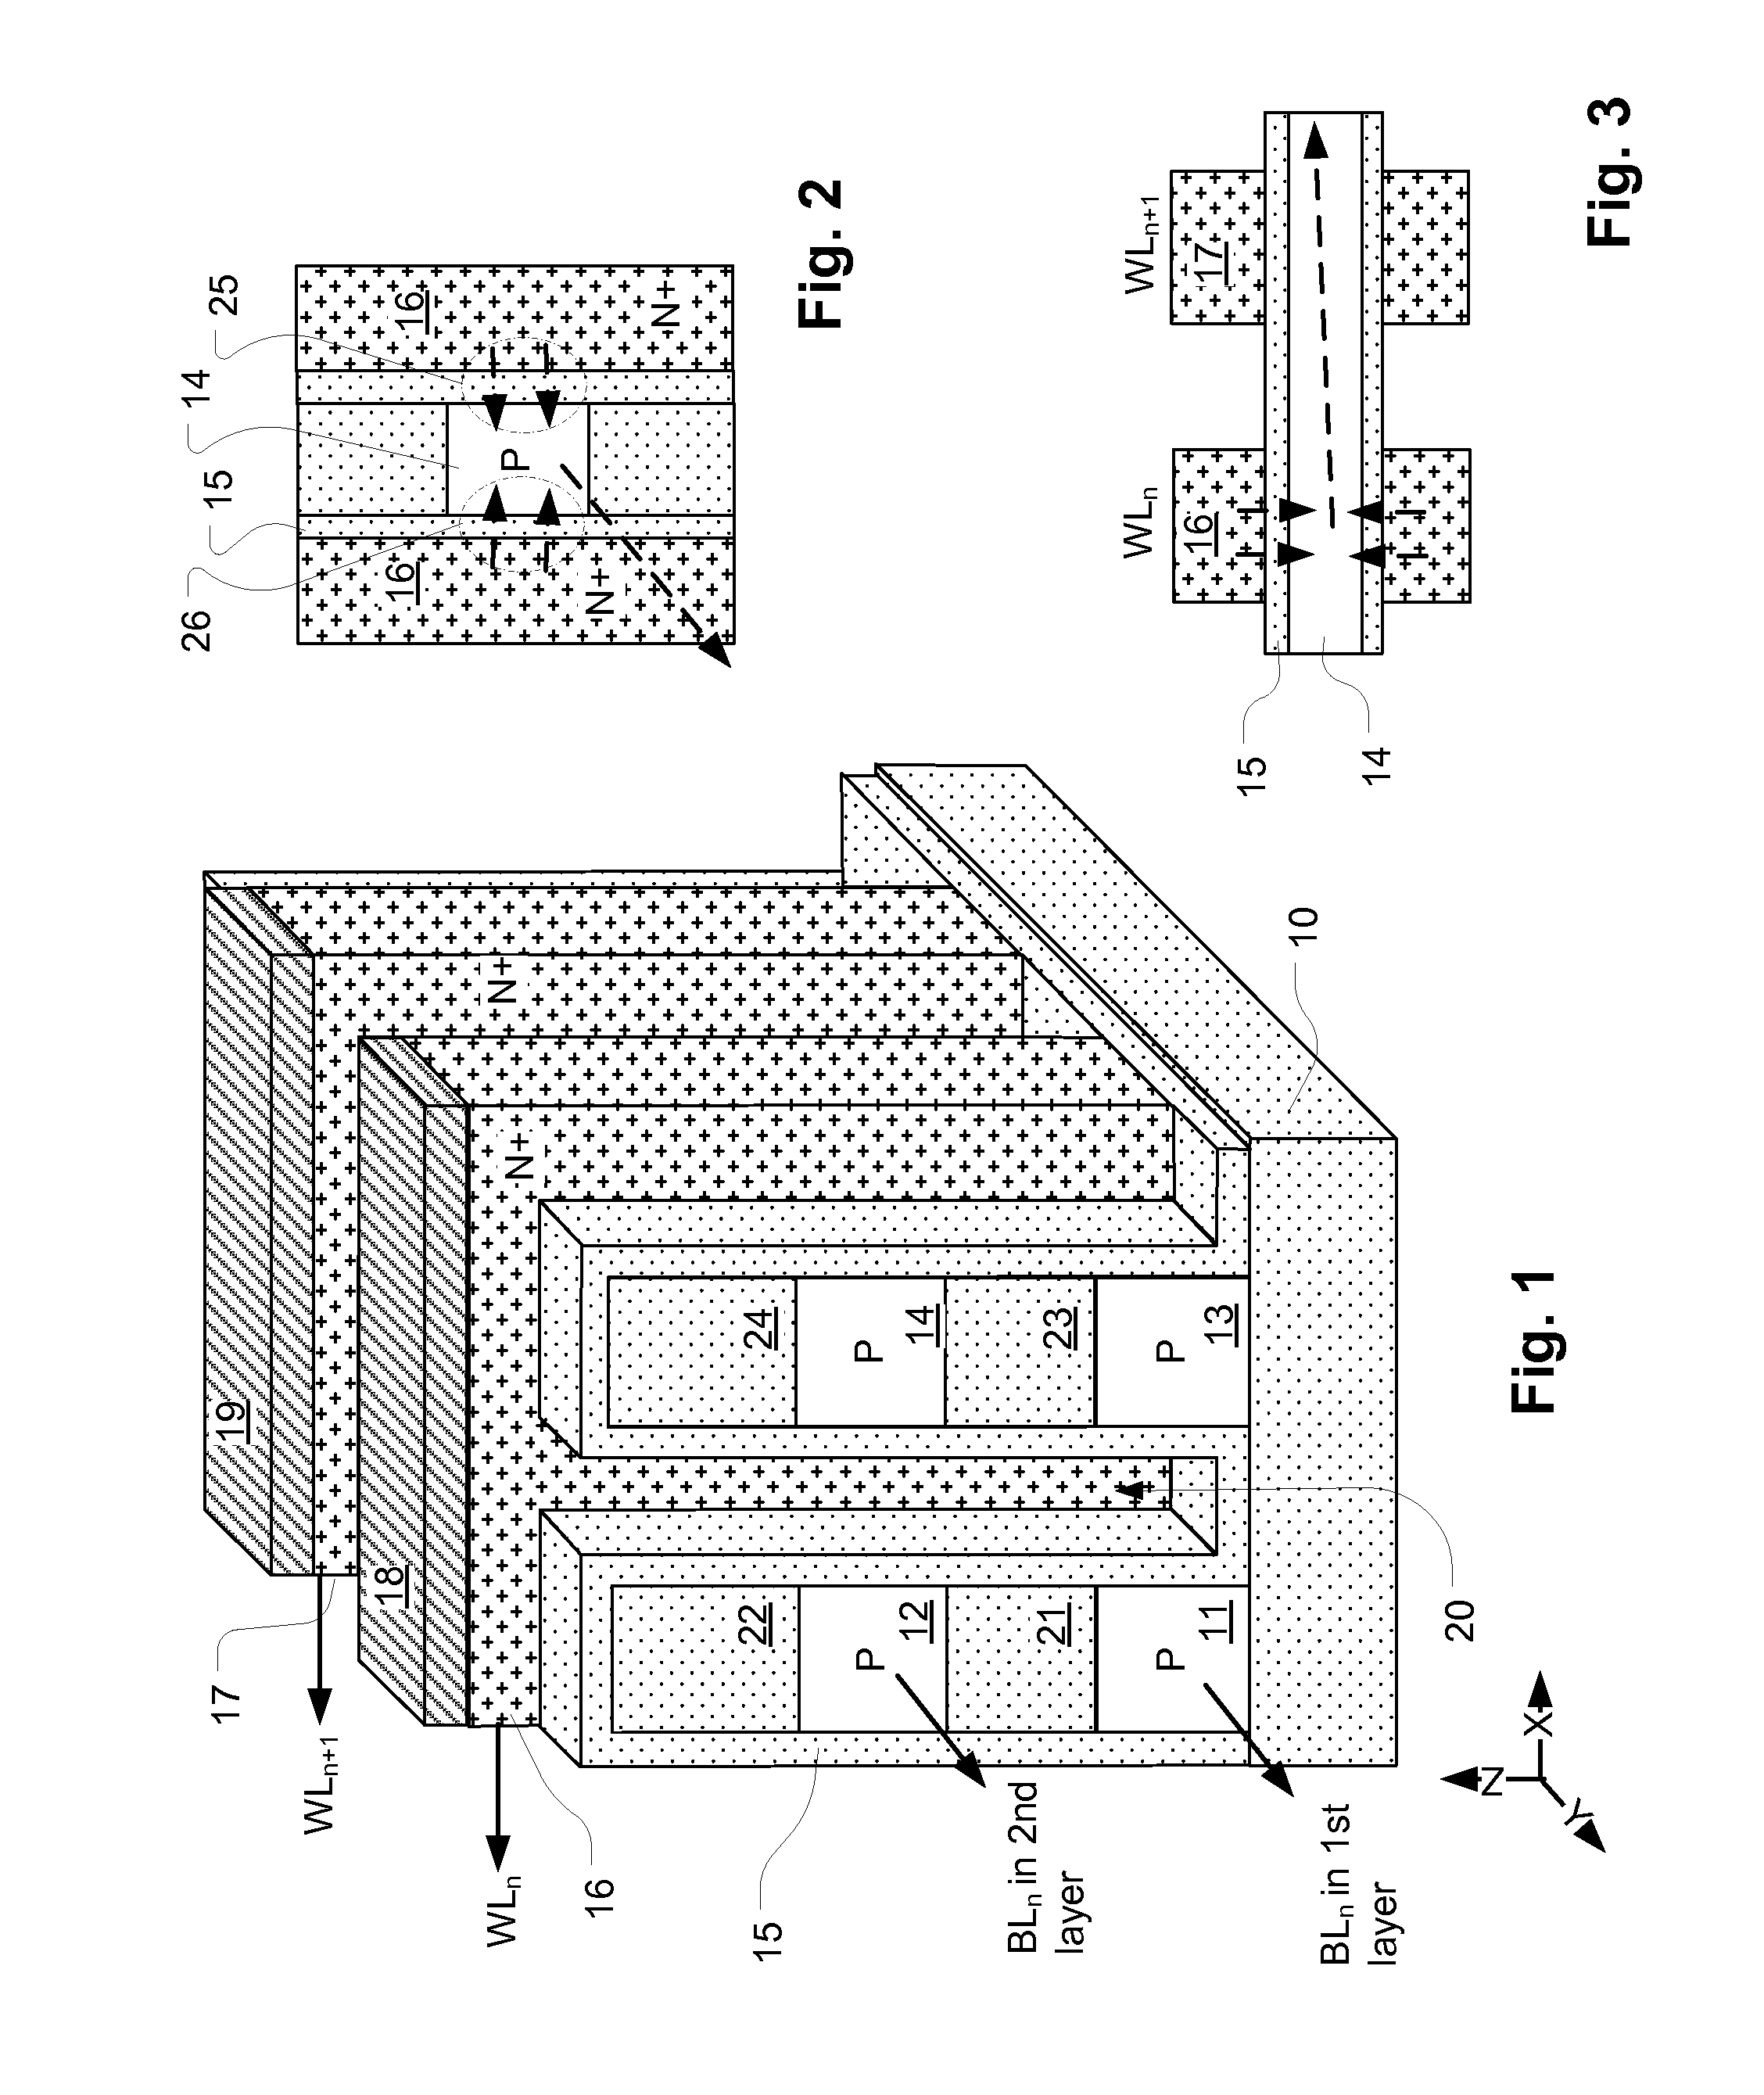 3D Memory Array With Improved SSL and BL Contact Layout